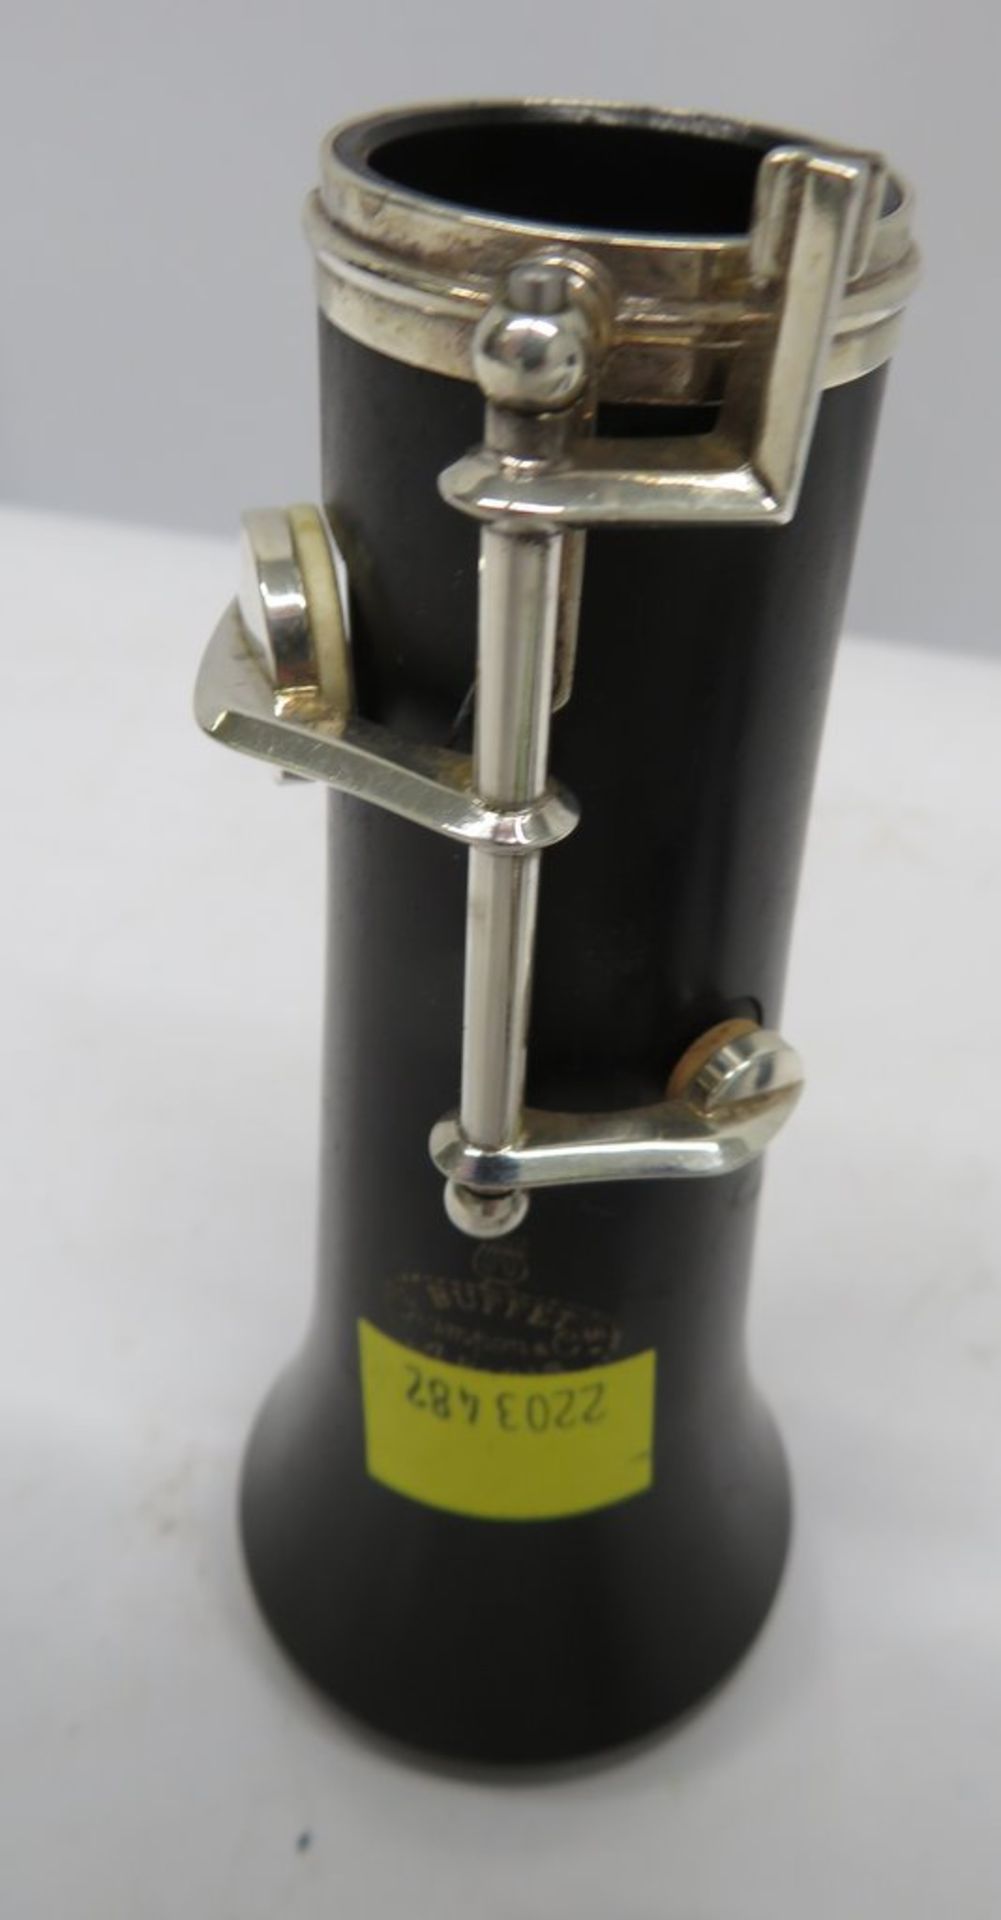 Buffet Crampon Oboe With Case. Serial Number: 9729. Please Note That This Item Has Not Be - Image 16 of 18